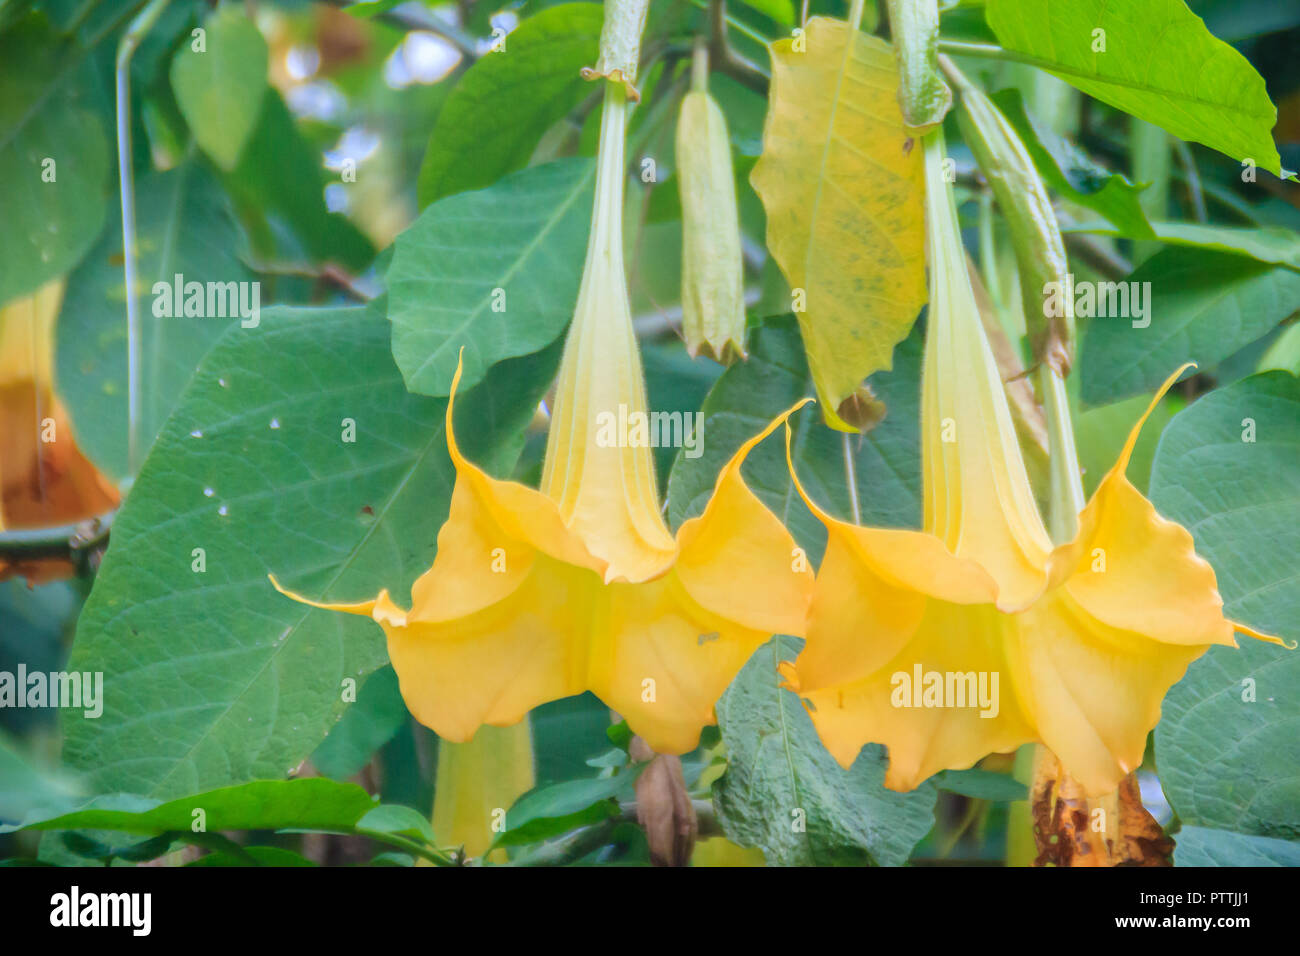 Yellow angel's trumpet flowers (Brugmansia suaveolens) on tree. Brugmansia suaveolens also known as angel trumpet, or angel's tears, is a South Americ Stock Photo